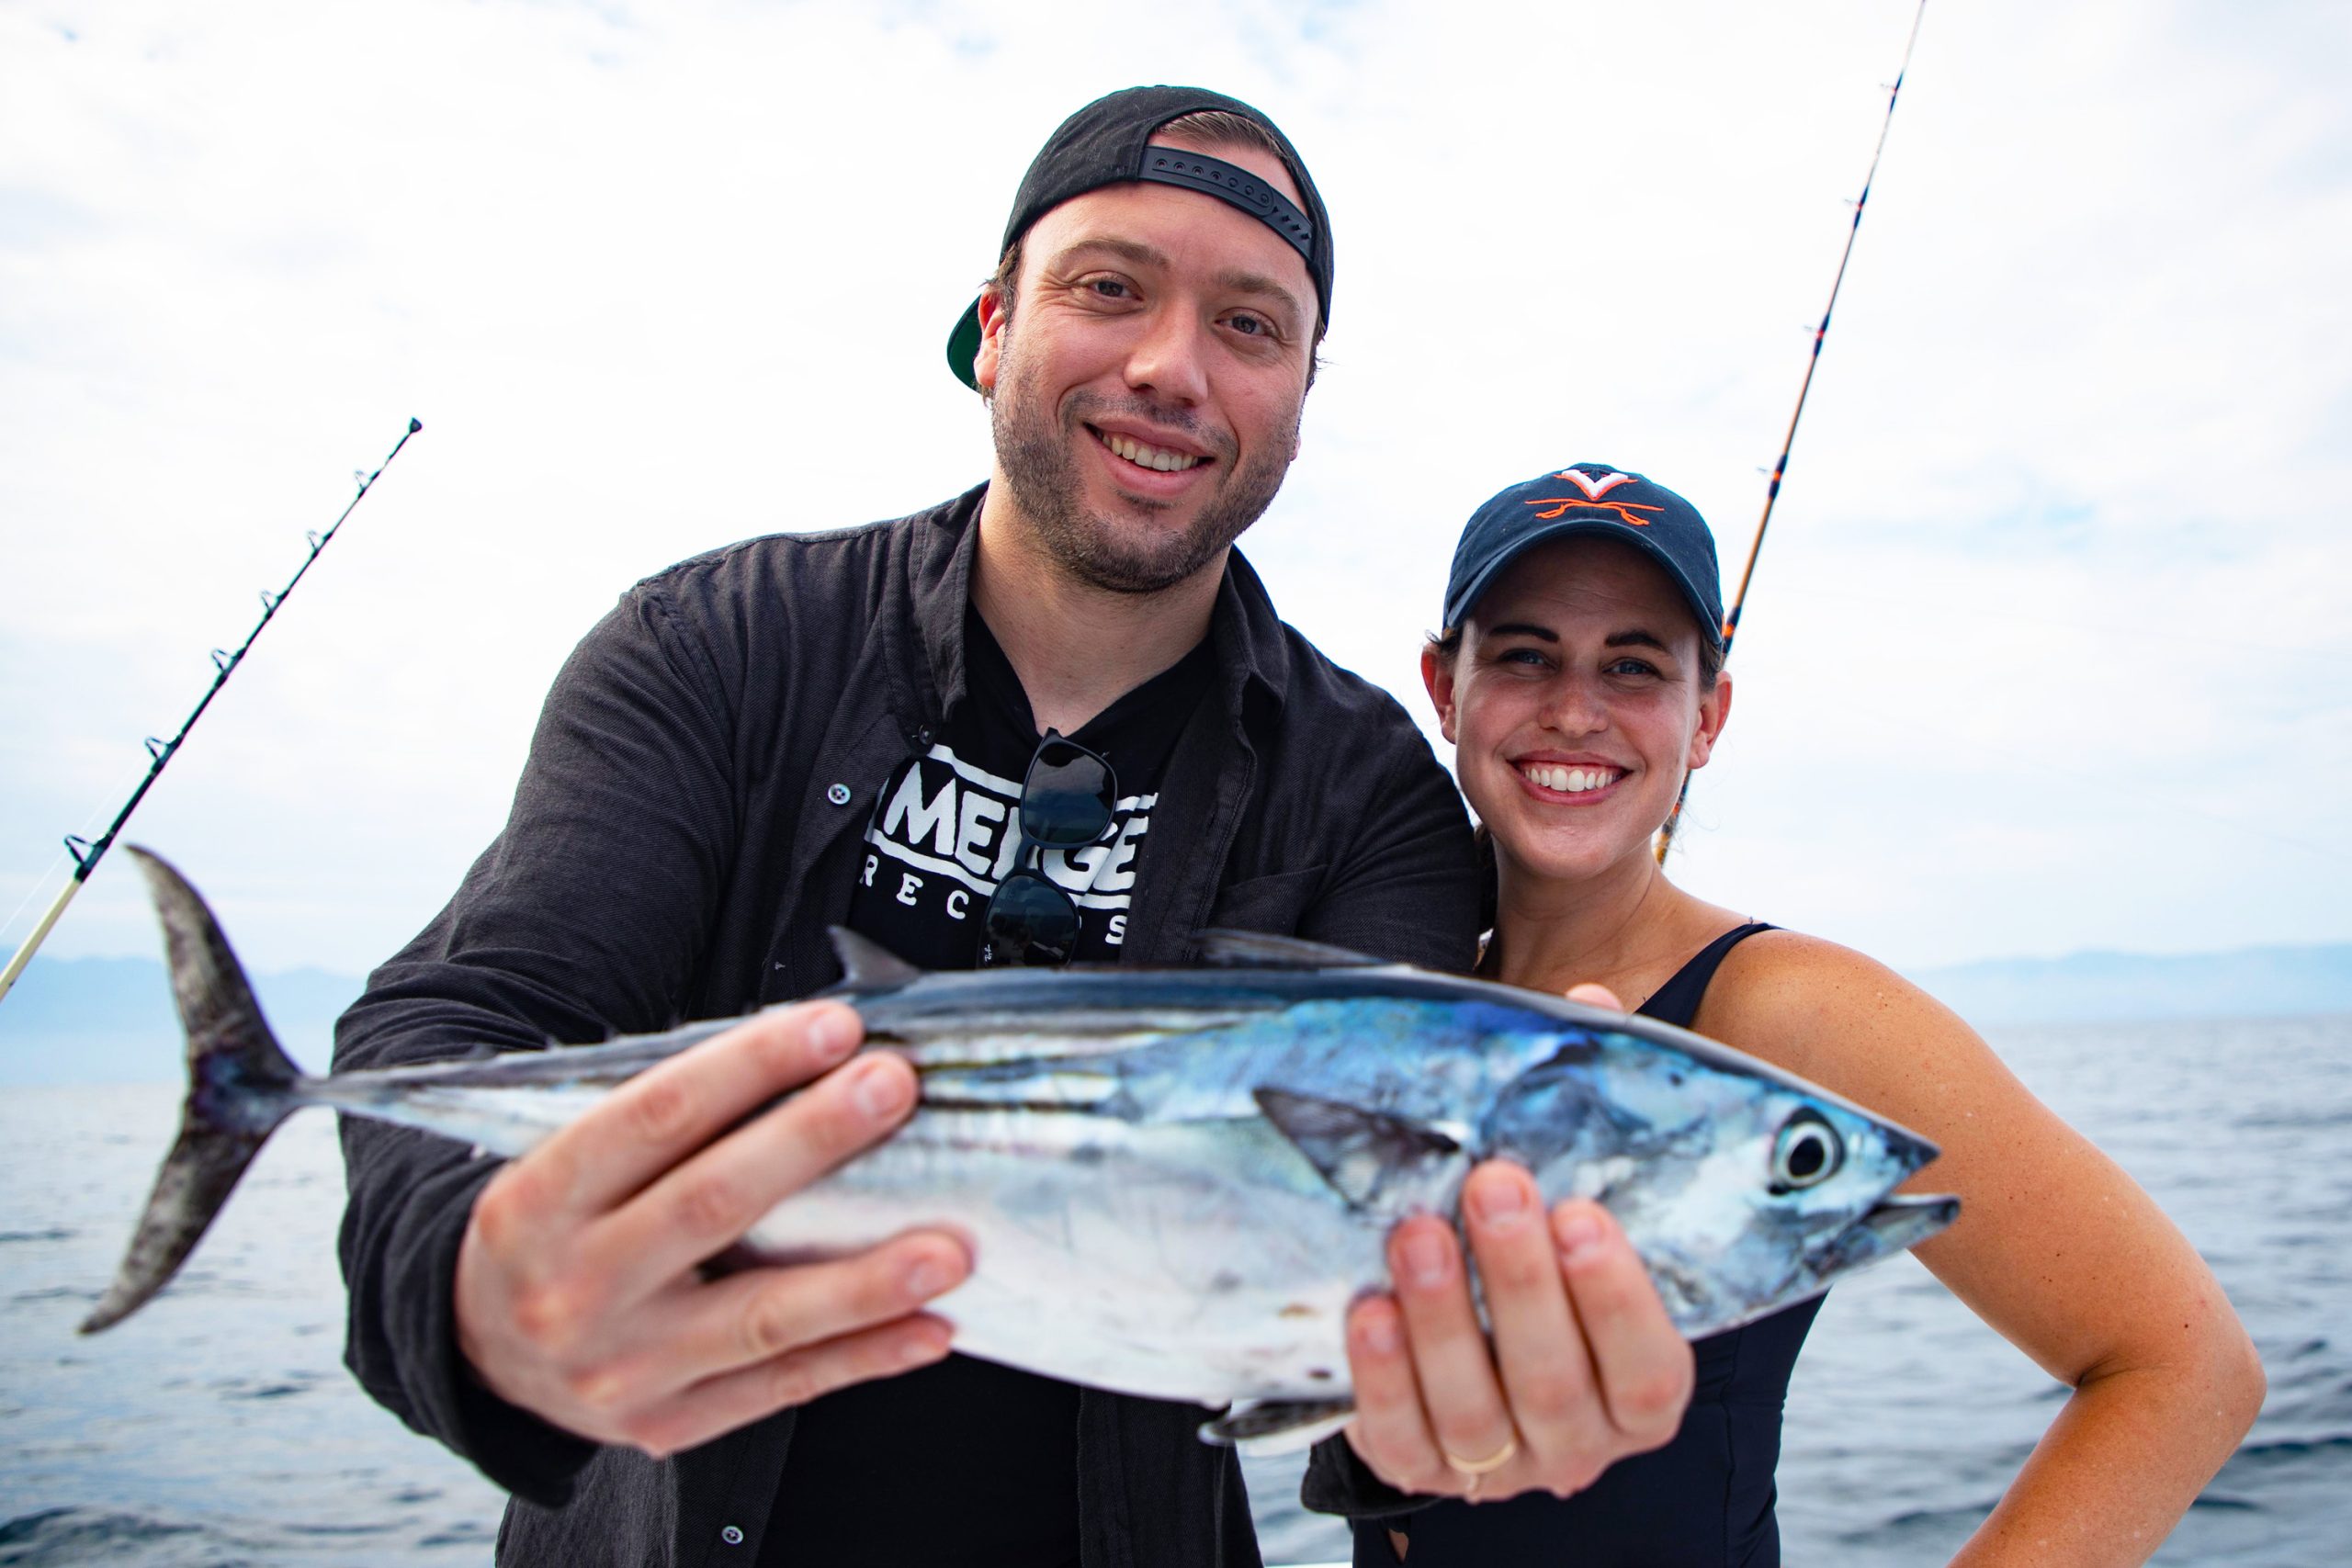 Get ready to cast your lines and explore new fishing experiences!